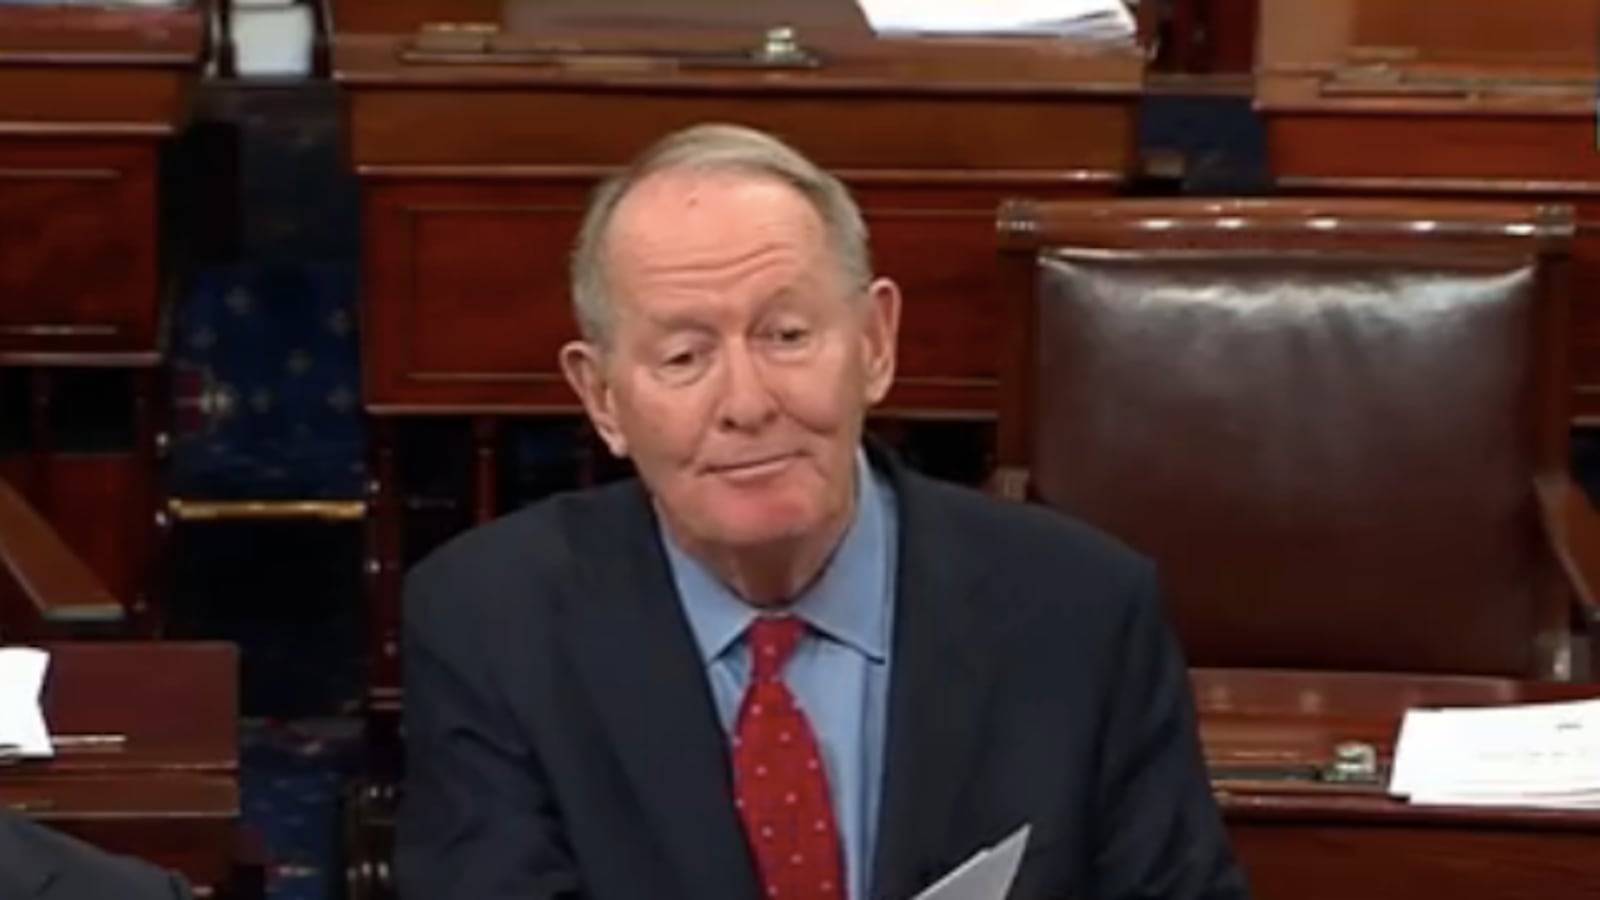 U.S. Sen. Lamar Alexander of Tennessee speaks to the U.S. Senate just minutes before the vote that confirmed the nomination of Betsy DeVos as U.S. secretary of education.